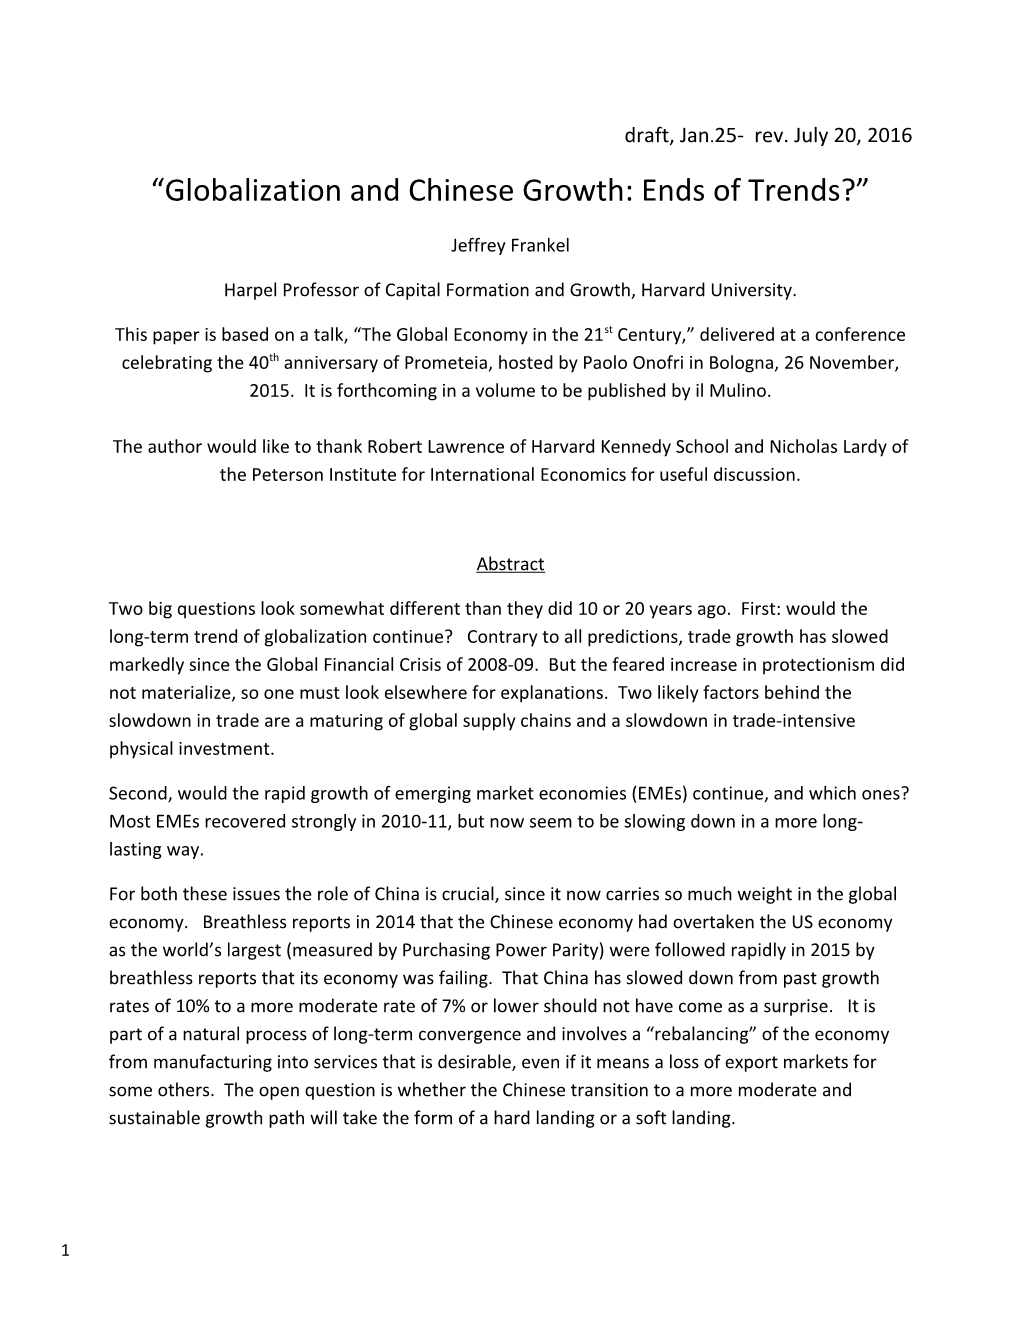 Globalization and Chinese Growth: Ends of Trends?